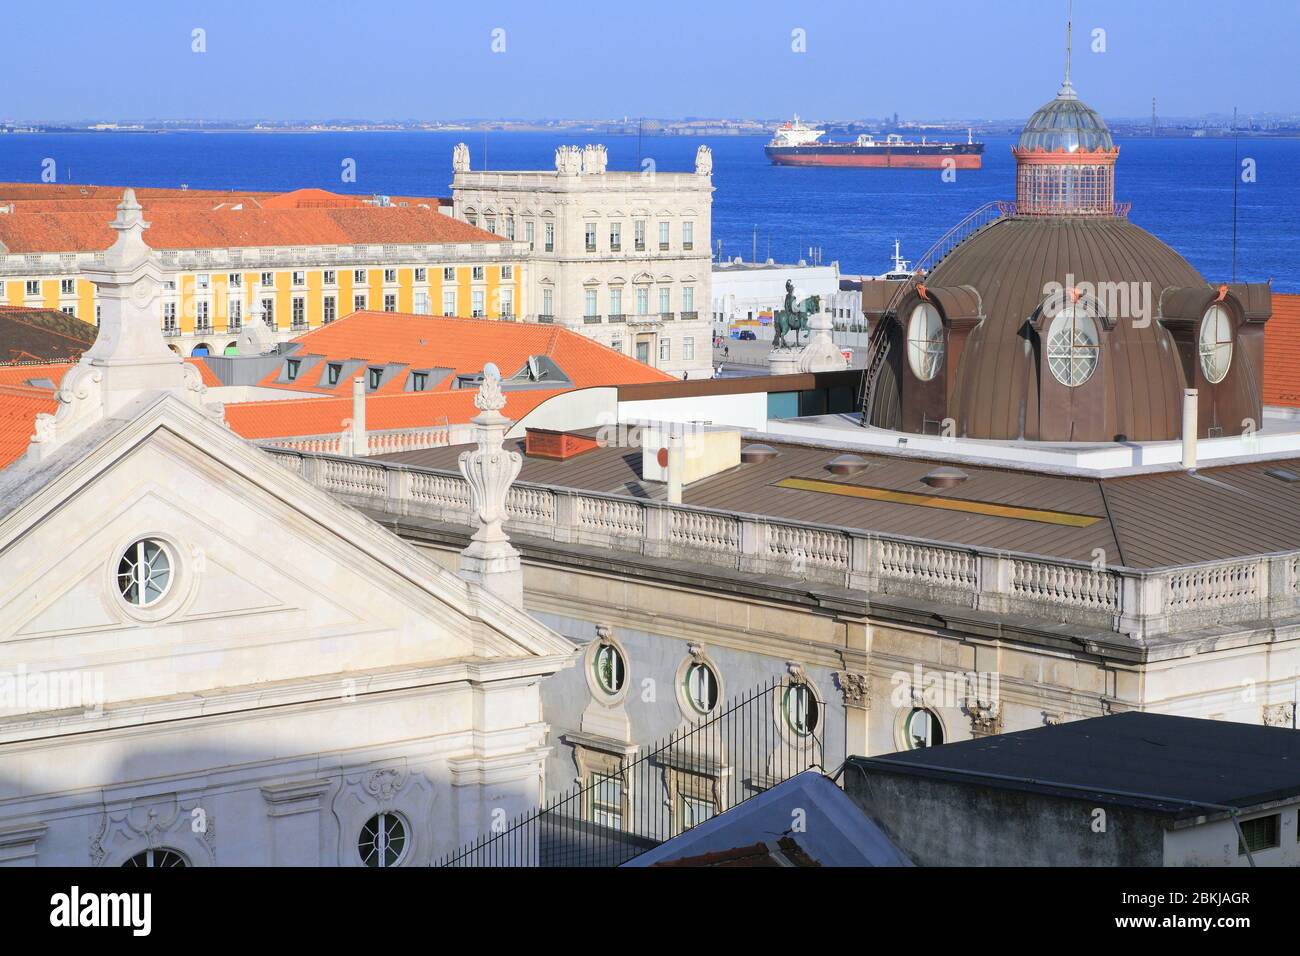 Portugal, Lisbon, Baixa, view of the Currency Museum (left), the Town Hall (right) and in the background the Praça do Comércio and the Tagus Stock Photo